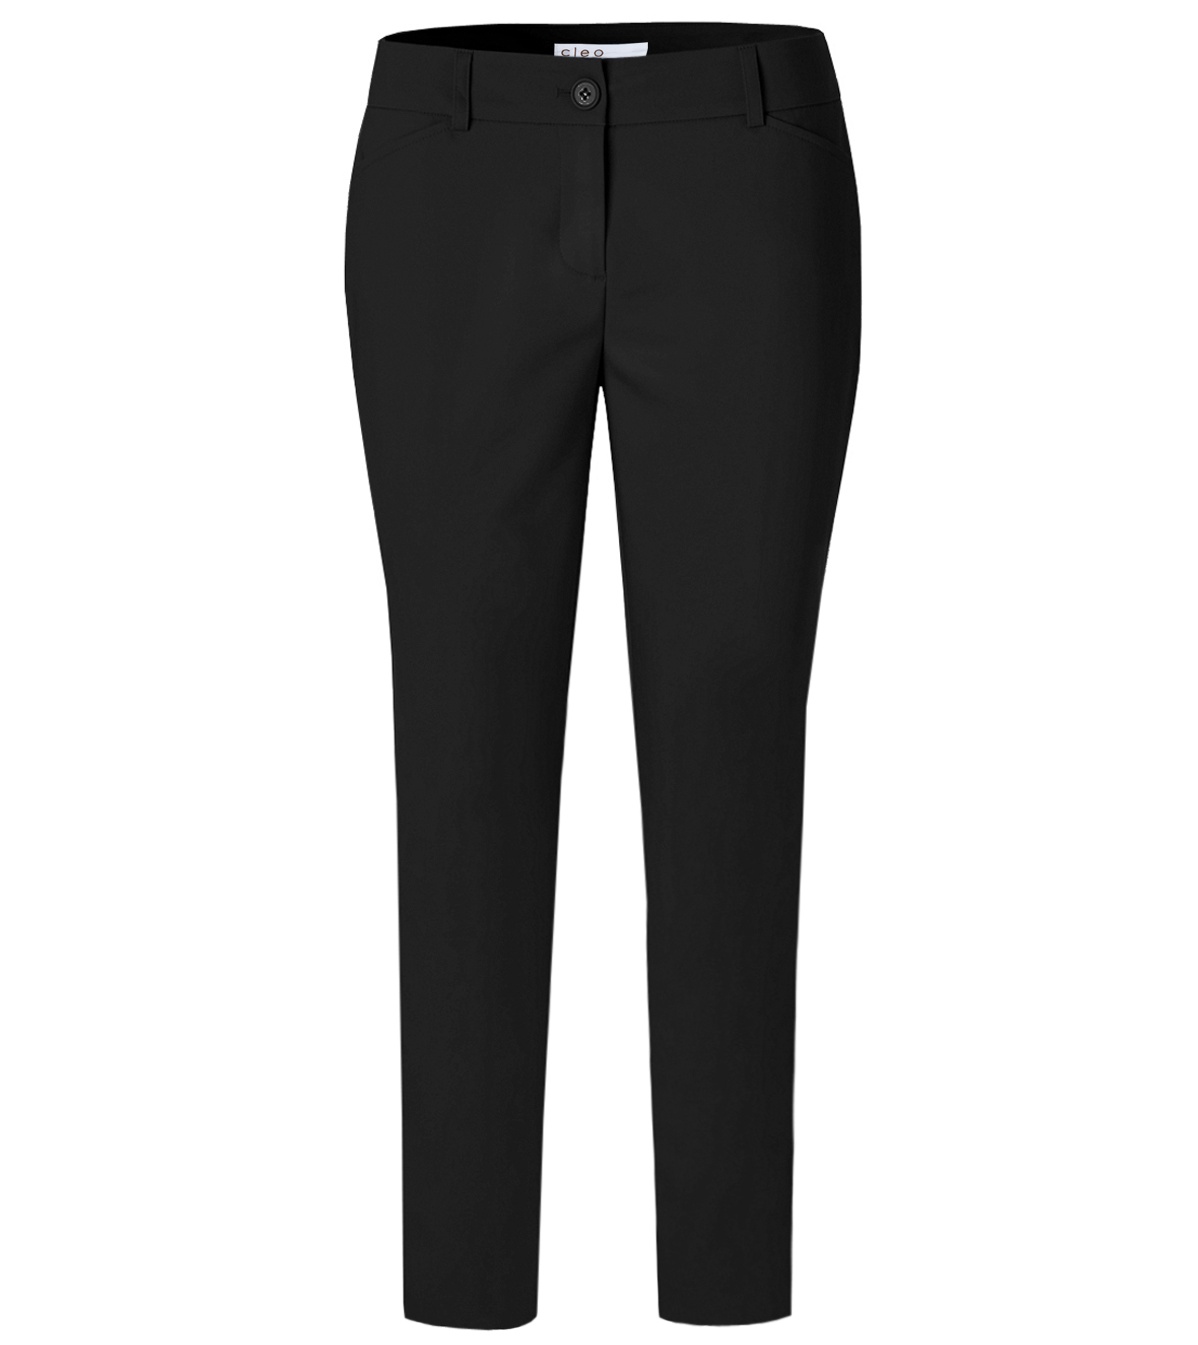 ankle pants that taper towards the anke